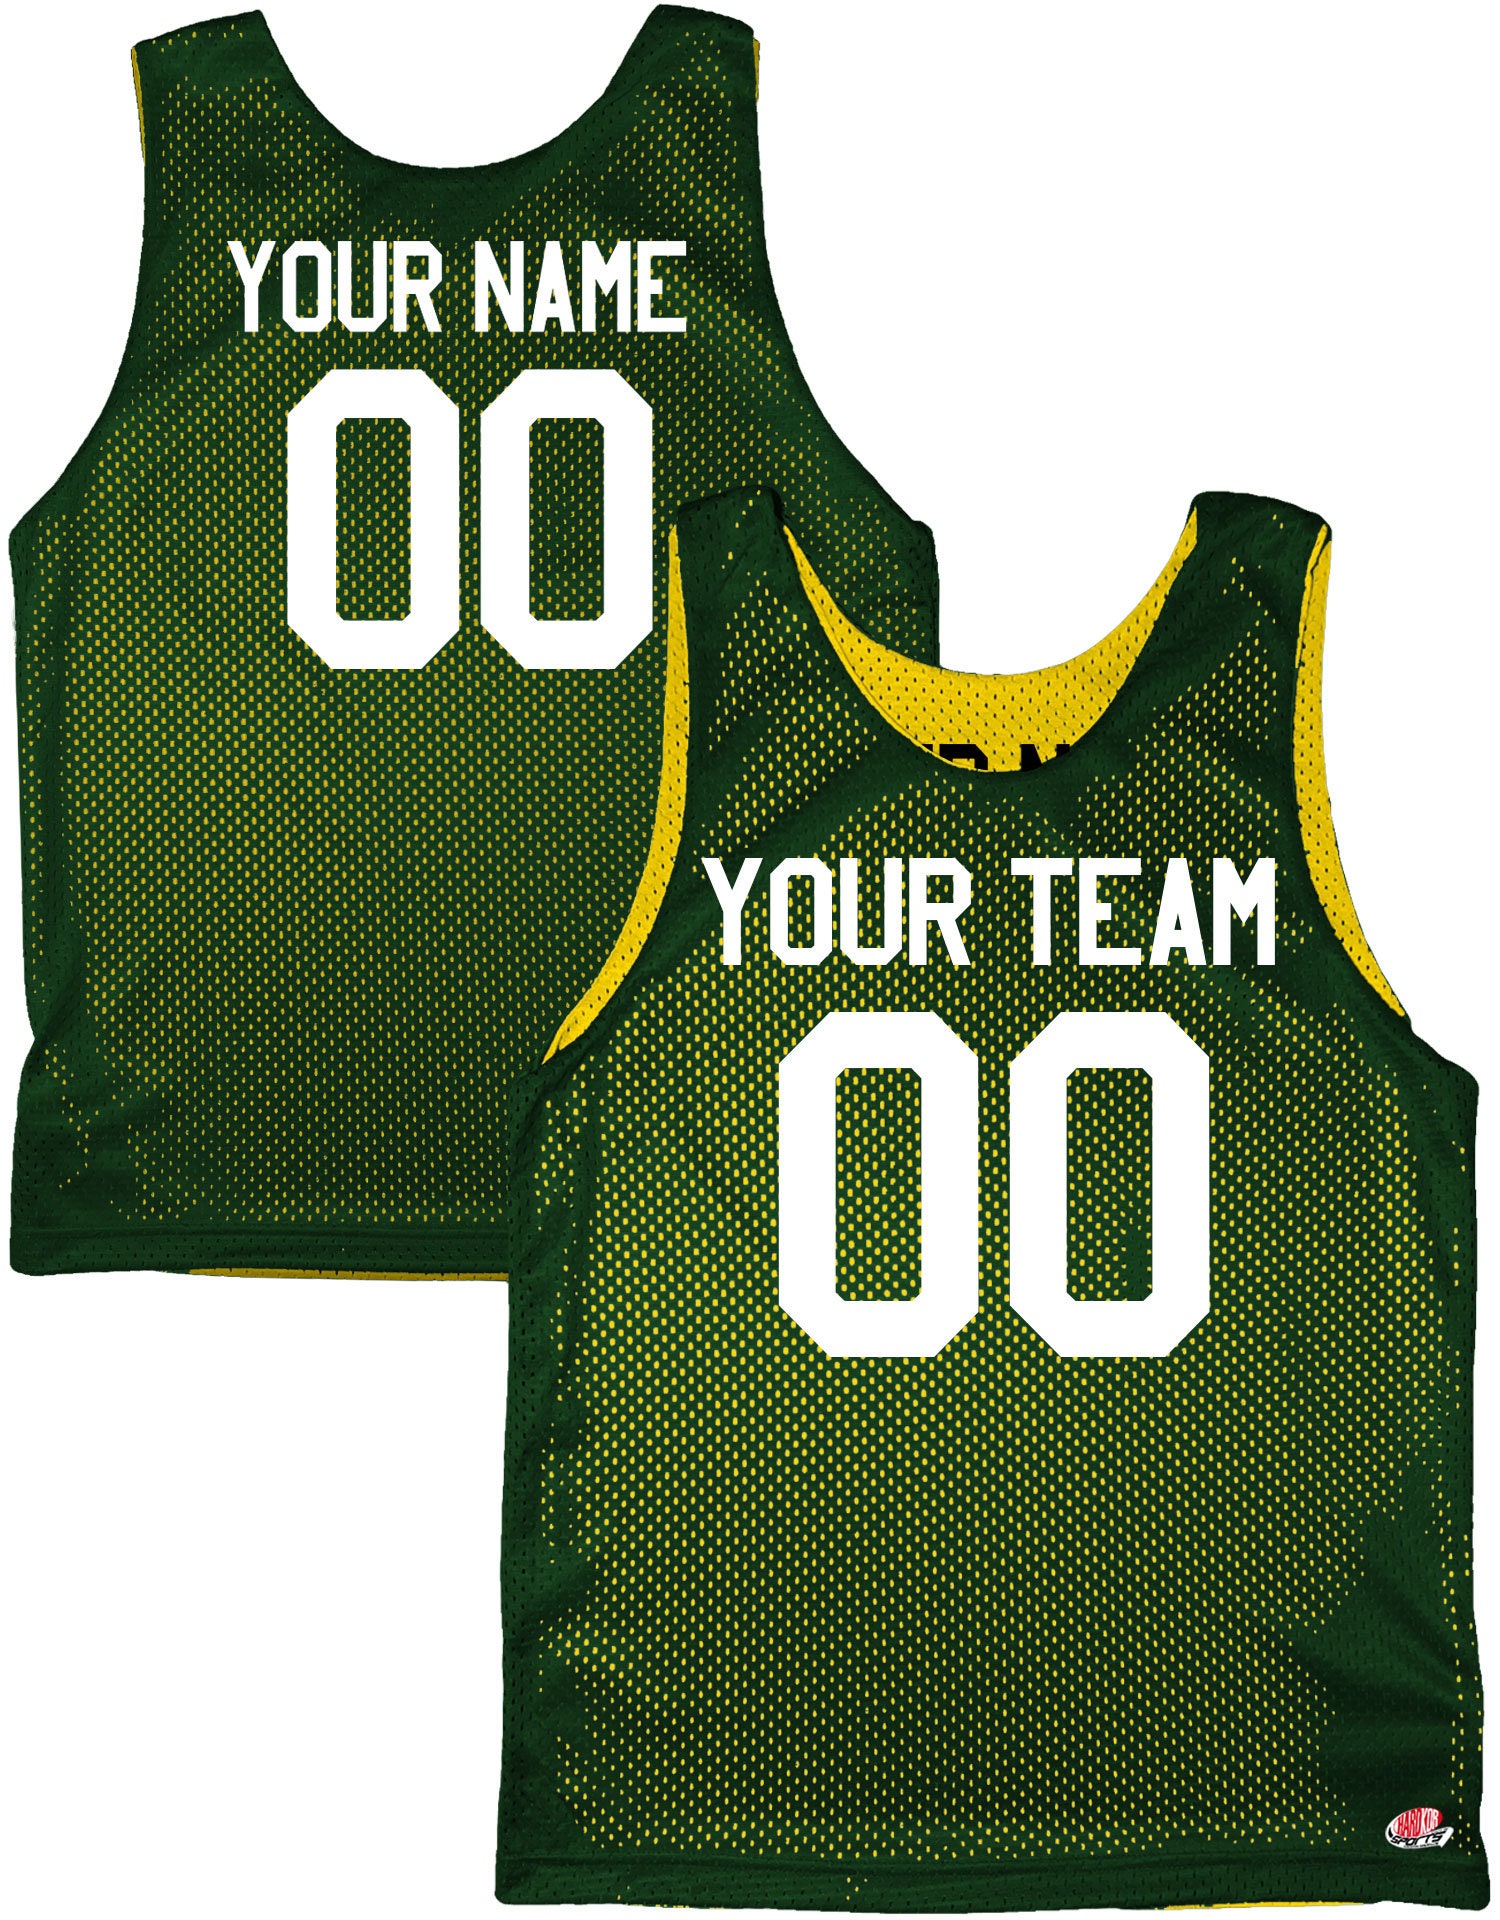 Wholesale basketball jersey green and black color For Comfortable  Sportswear 